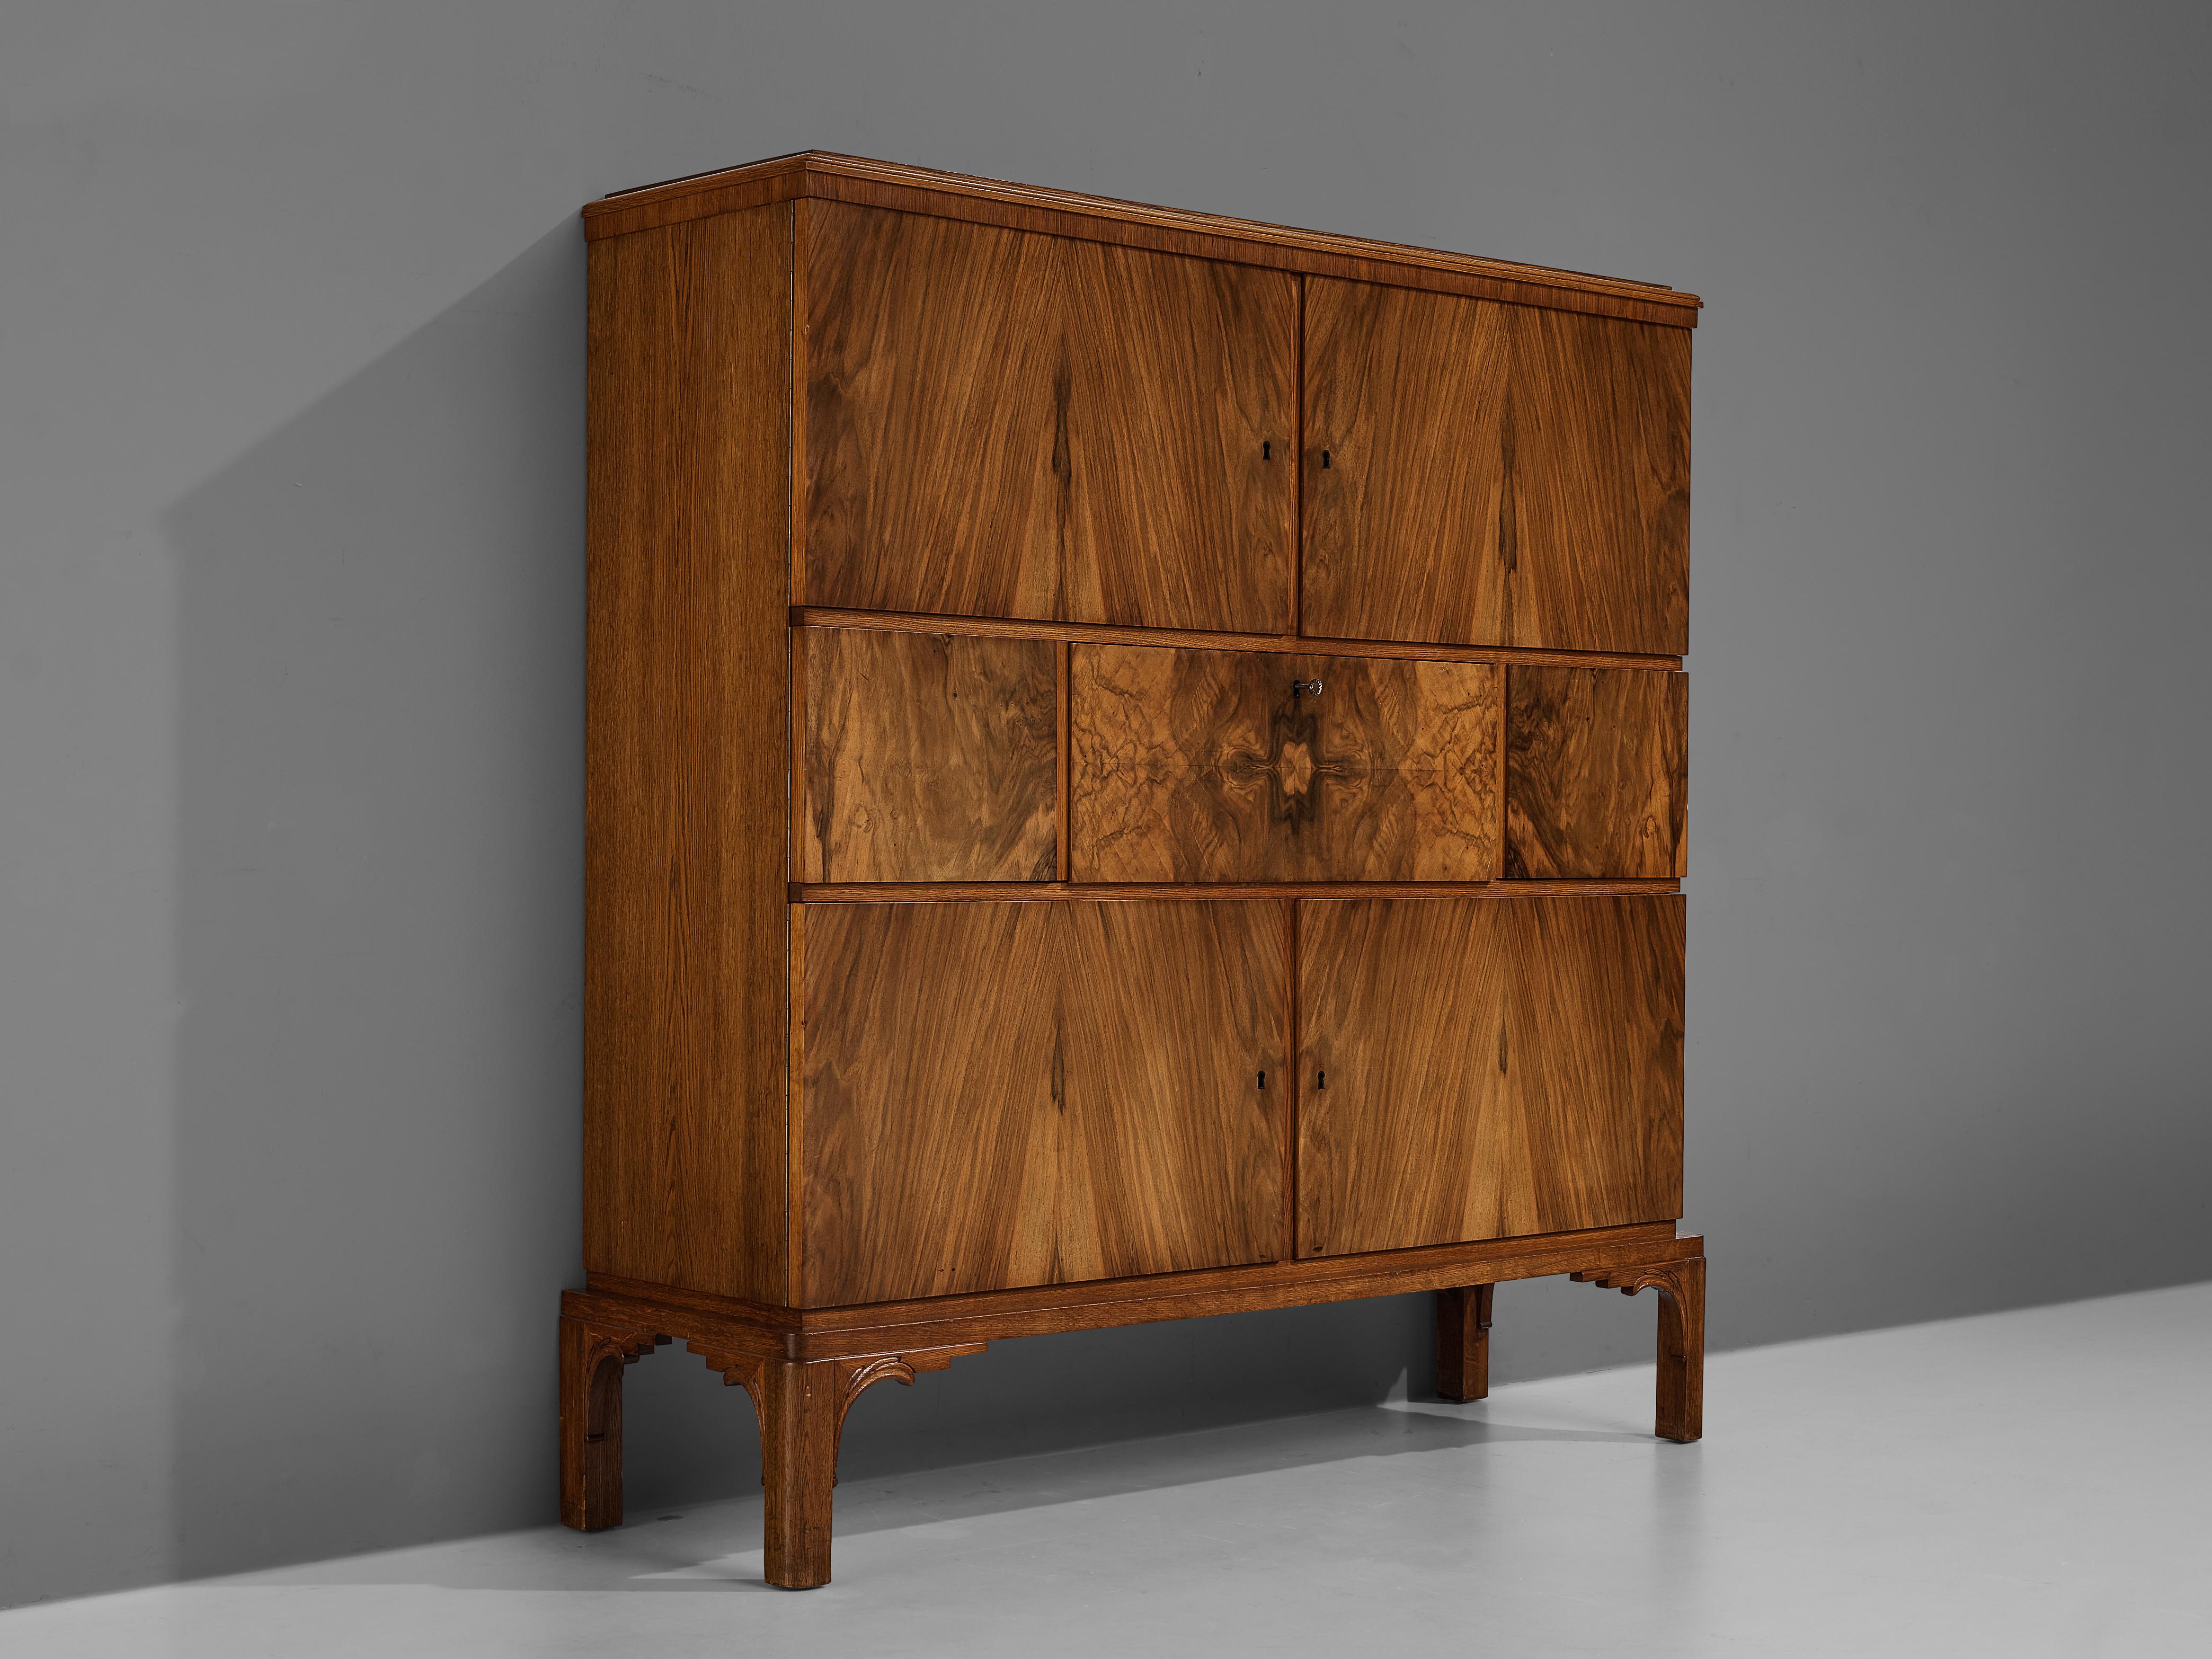 Cabinet, walnut veneer, oak, bakelite, metal, Sweden, 1930s

Swedish Grace cabinet with secretaire in walnut veneer and oak. The high-quality piece satisfied with a design that could not be more pleasing for the viewer’s eye. Veneered walnut with an